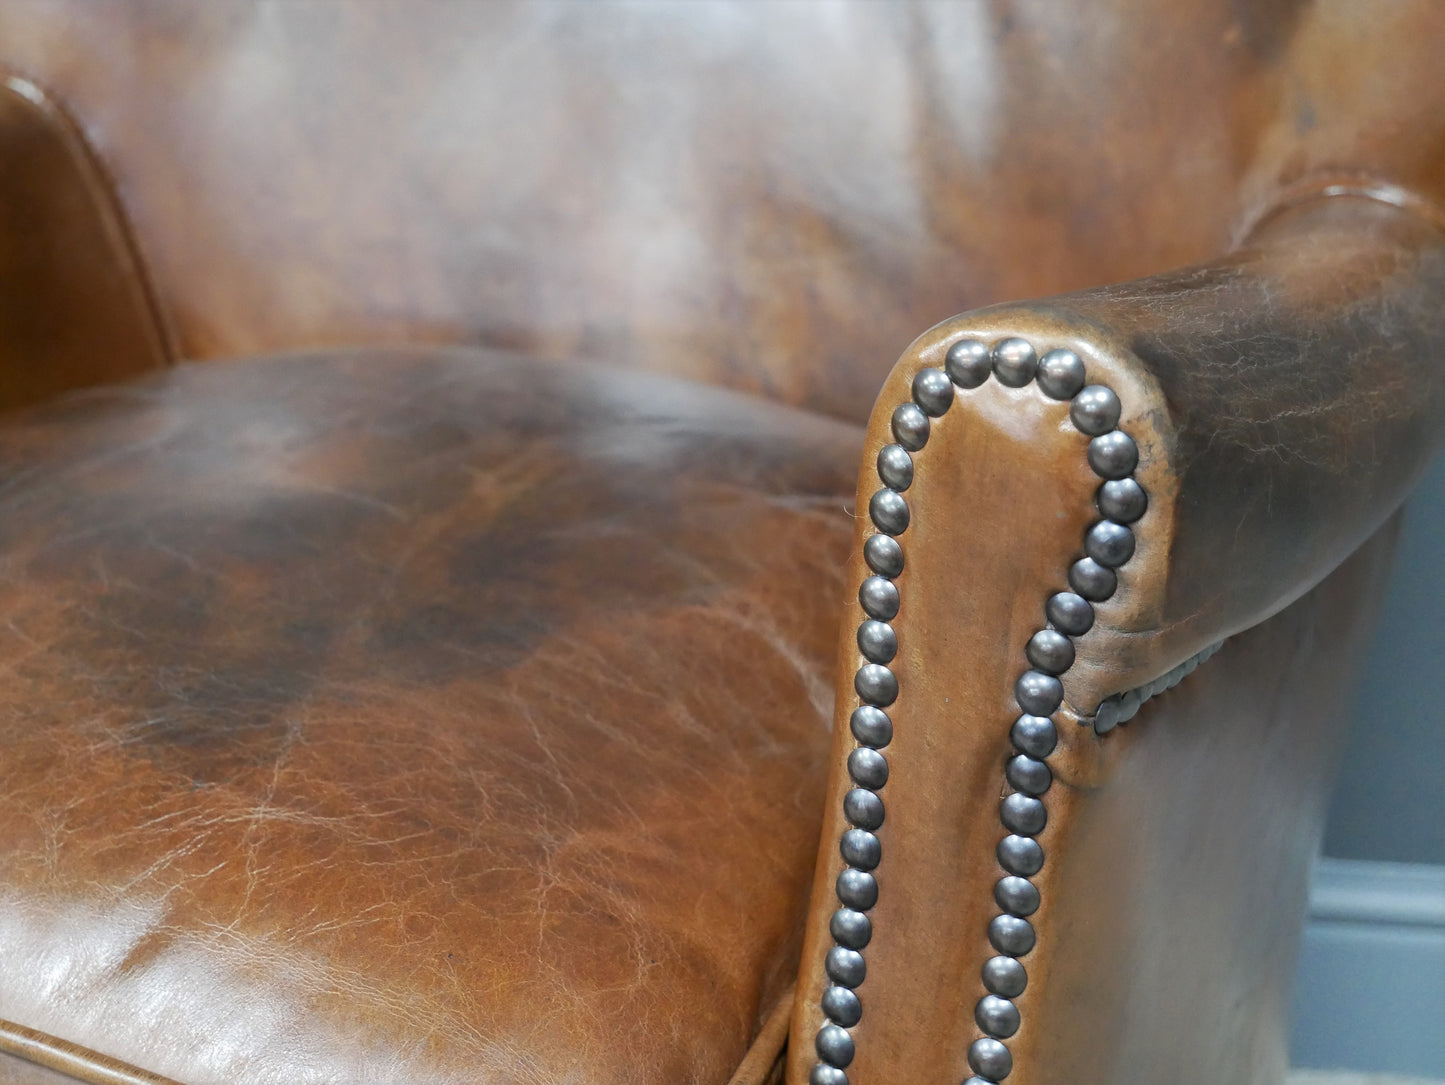 Leather Cosy Chair